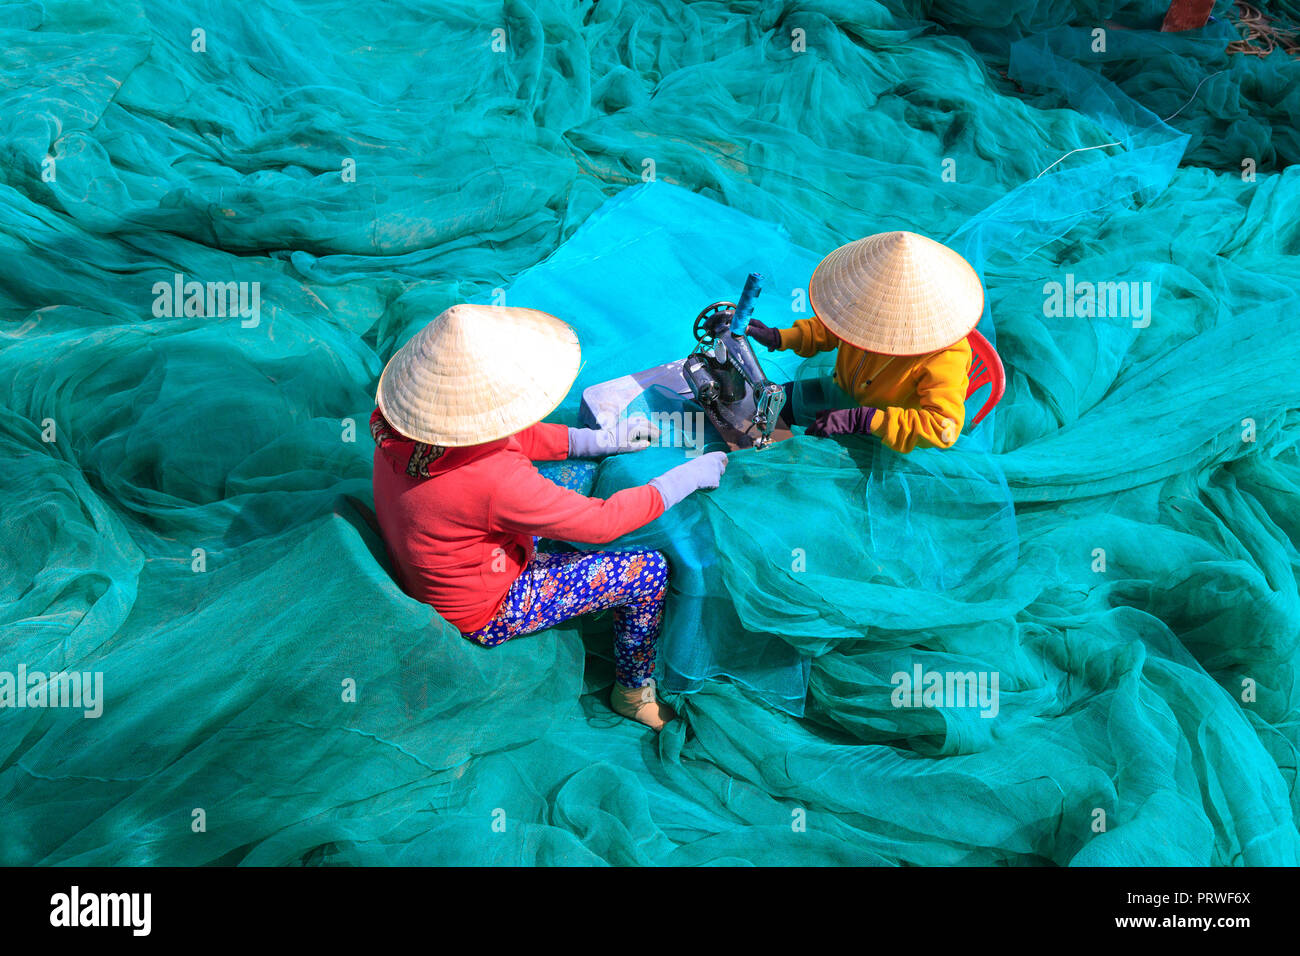 https://c8.alamy.com/comp/PRWF6X/two-women-are-sewing-fishing-nets-in-fishing-village-in-vinh-hy-bay-phan-rang-province-PRWF6X.jpg